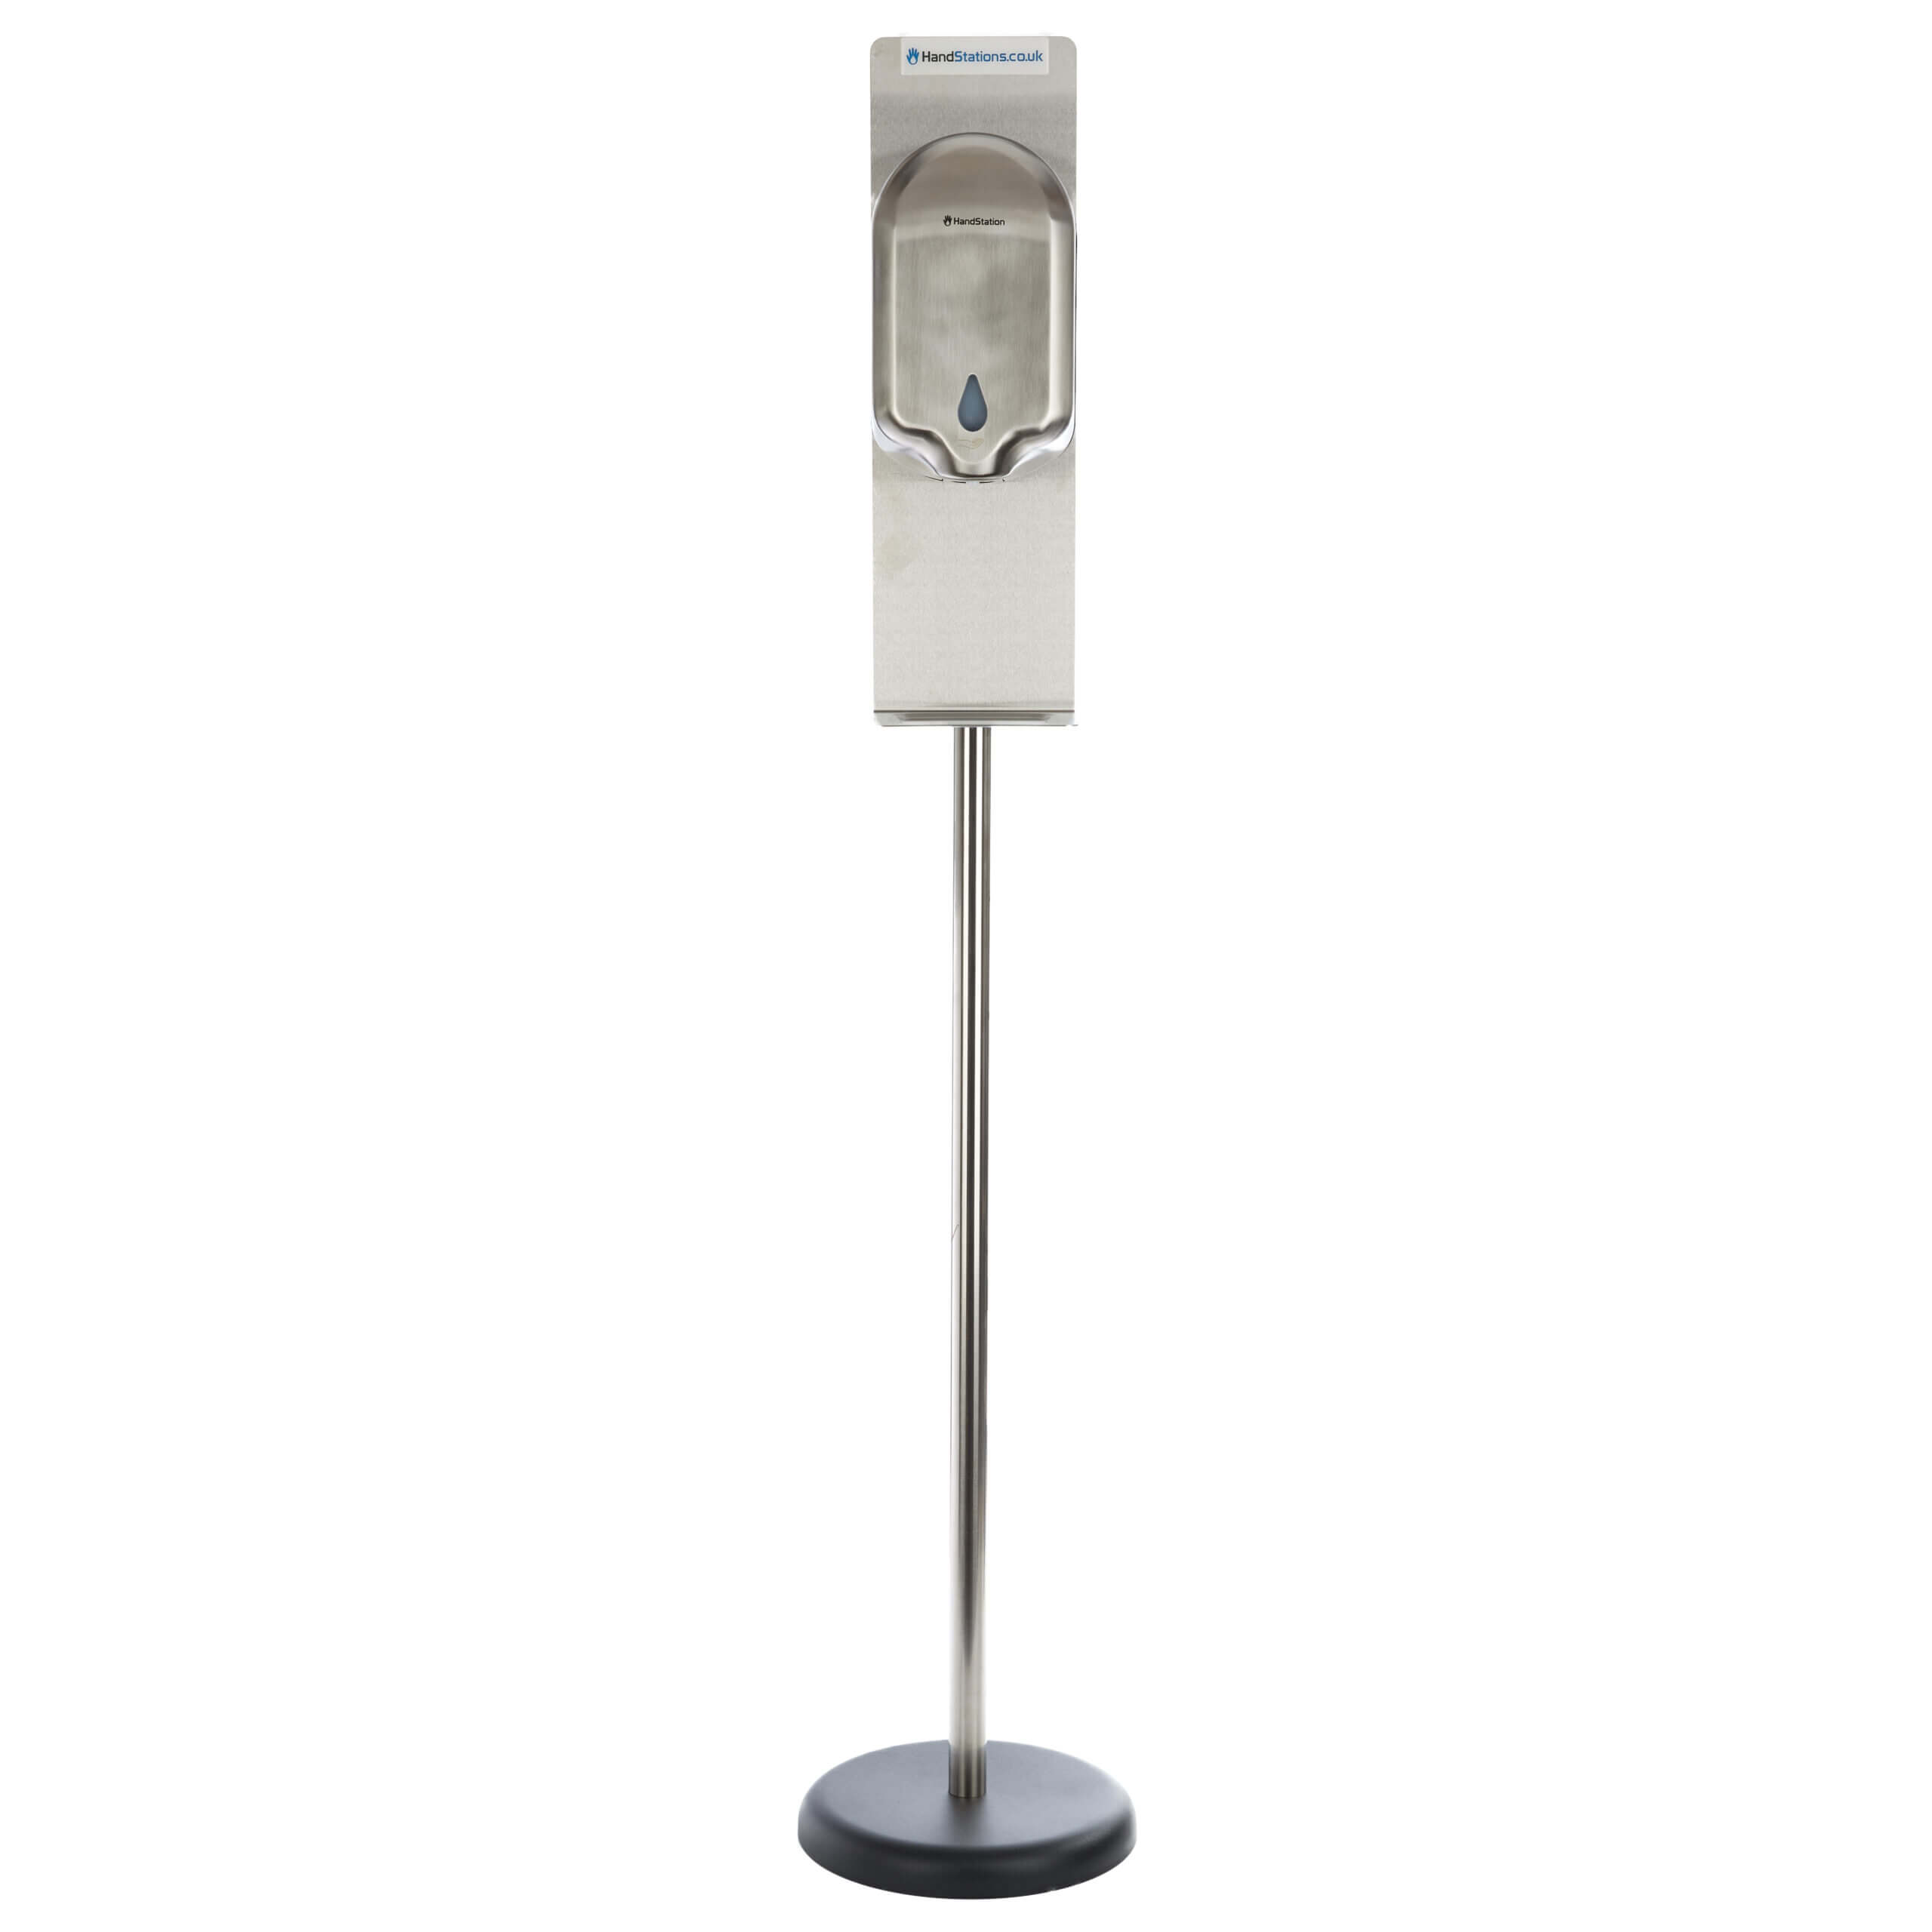 HandStation Eco Stainless Steel Floor Standing Automatic Touch Free Hand Sanitiser System – Foam Dispenser